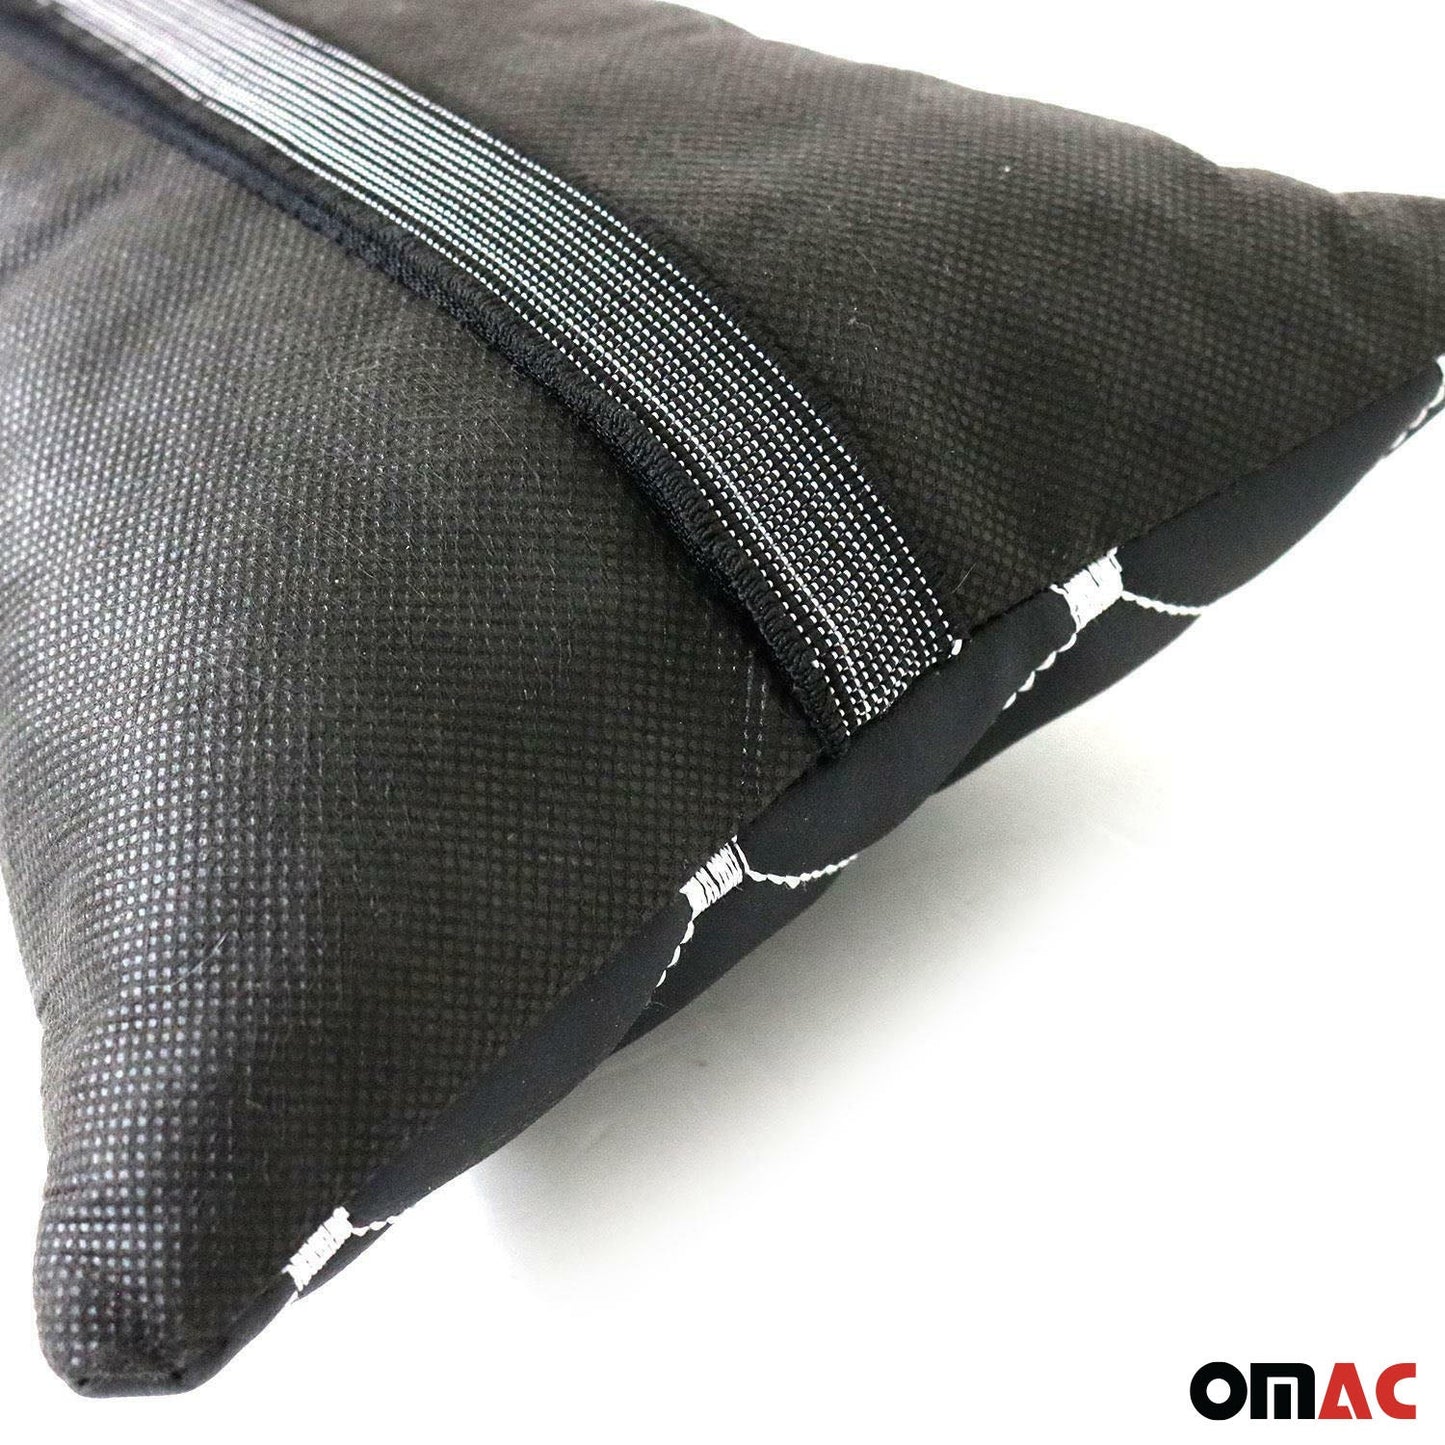 OMAC 1x Car Seat Neck Pillow Head Shoulder Rest Pad PU Leather Black with White 96322-BS1